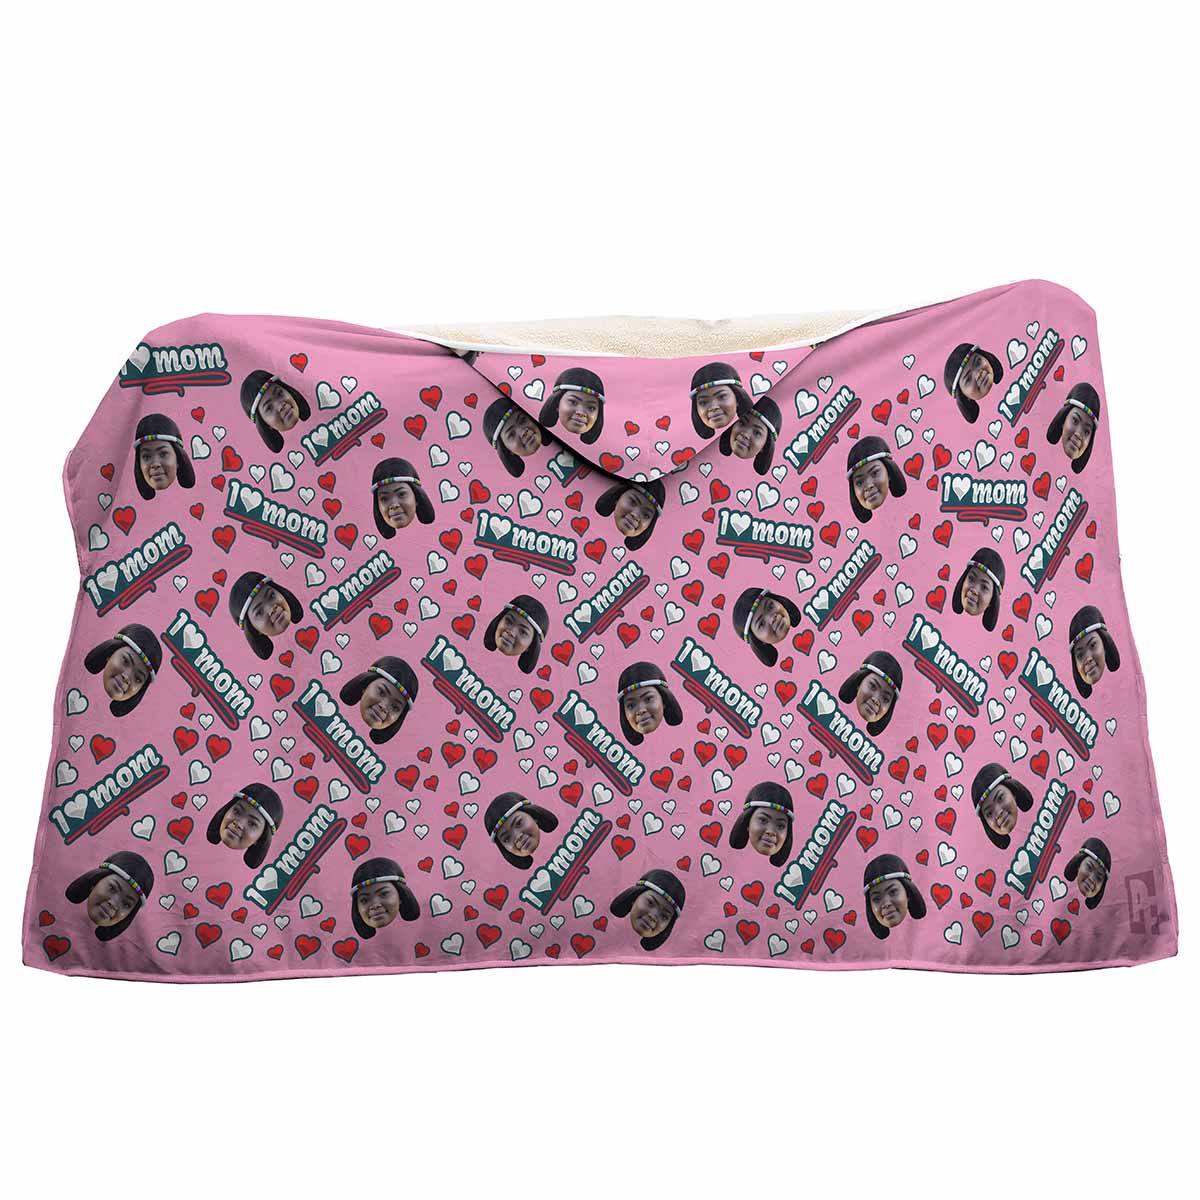 pink Love Mom hooded blanket personalized with photo of face printed on it